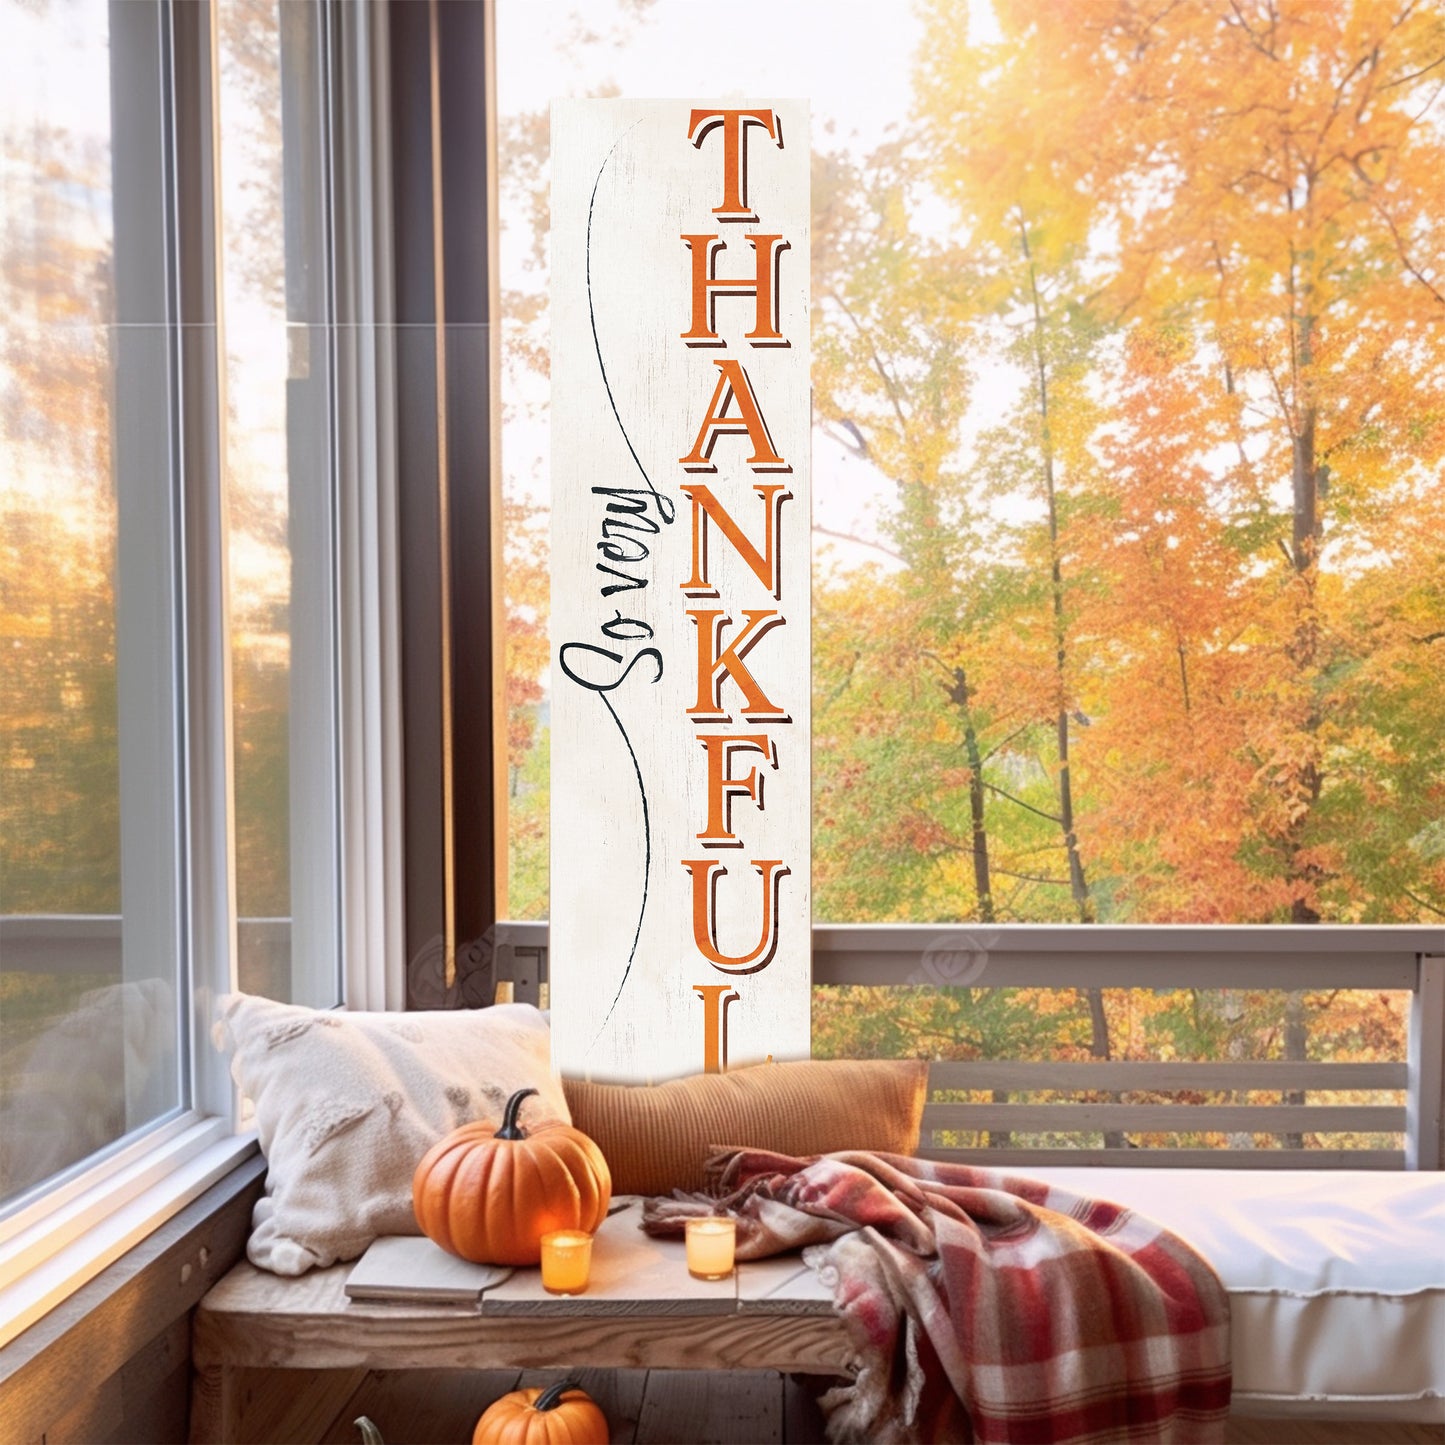 36-Inch "So Very Thankful" Thanksgiving Porch Sign - Wooden Decor - Festive Fall Display for Front Door or Entryway